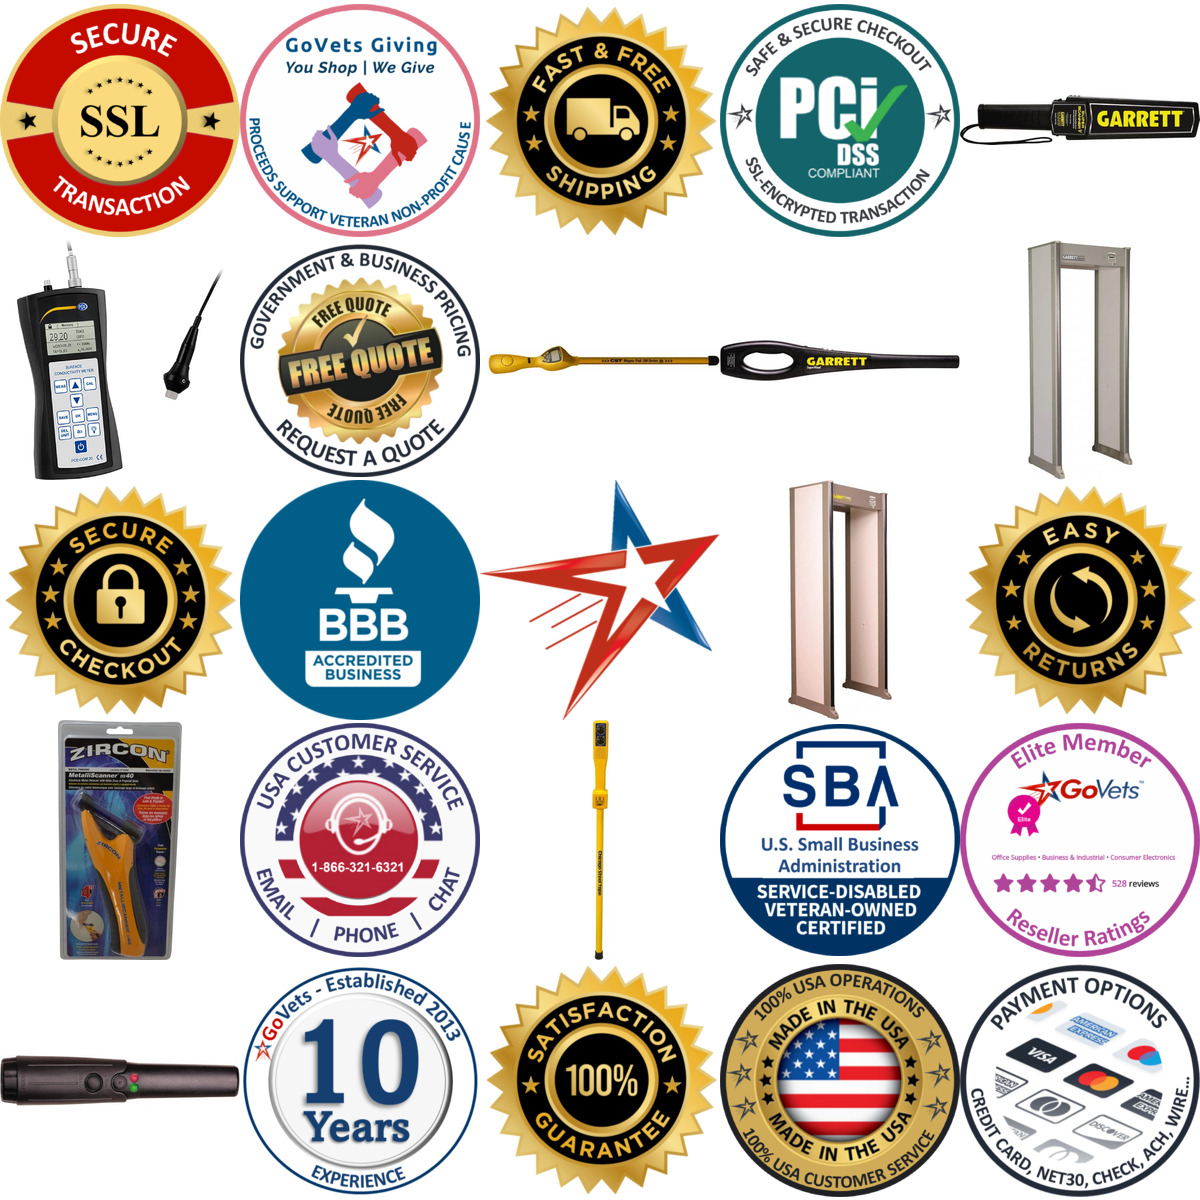 A selection of Metal Detectors and Magnetic Locators products on GoVets